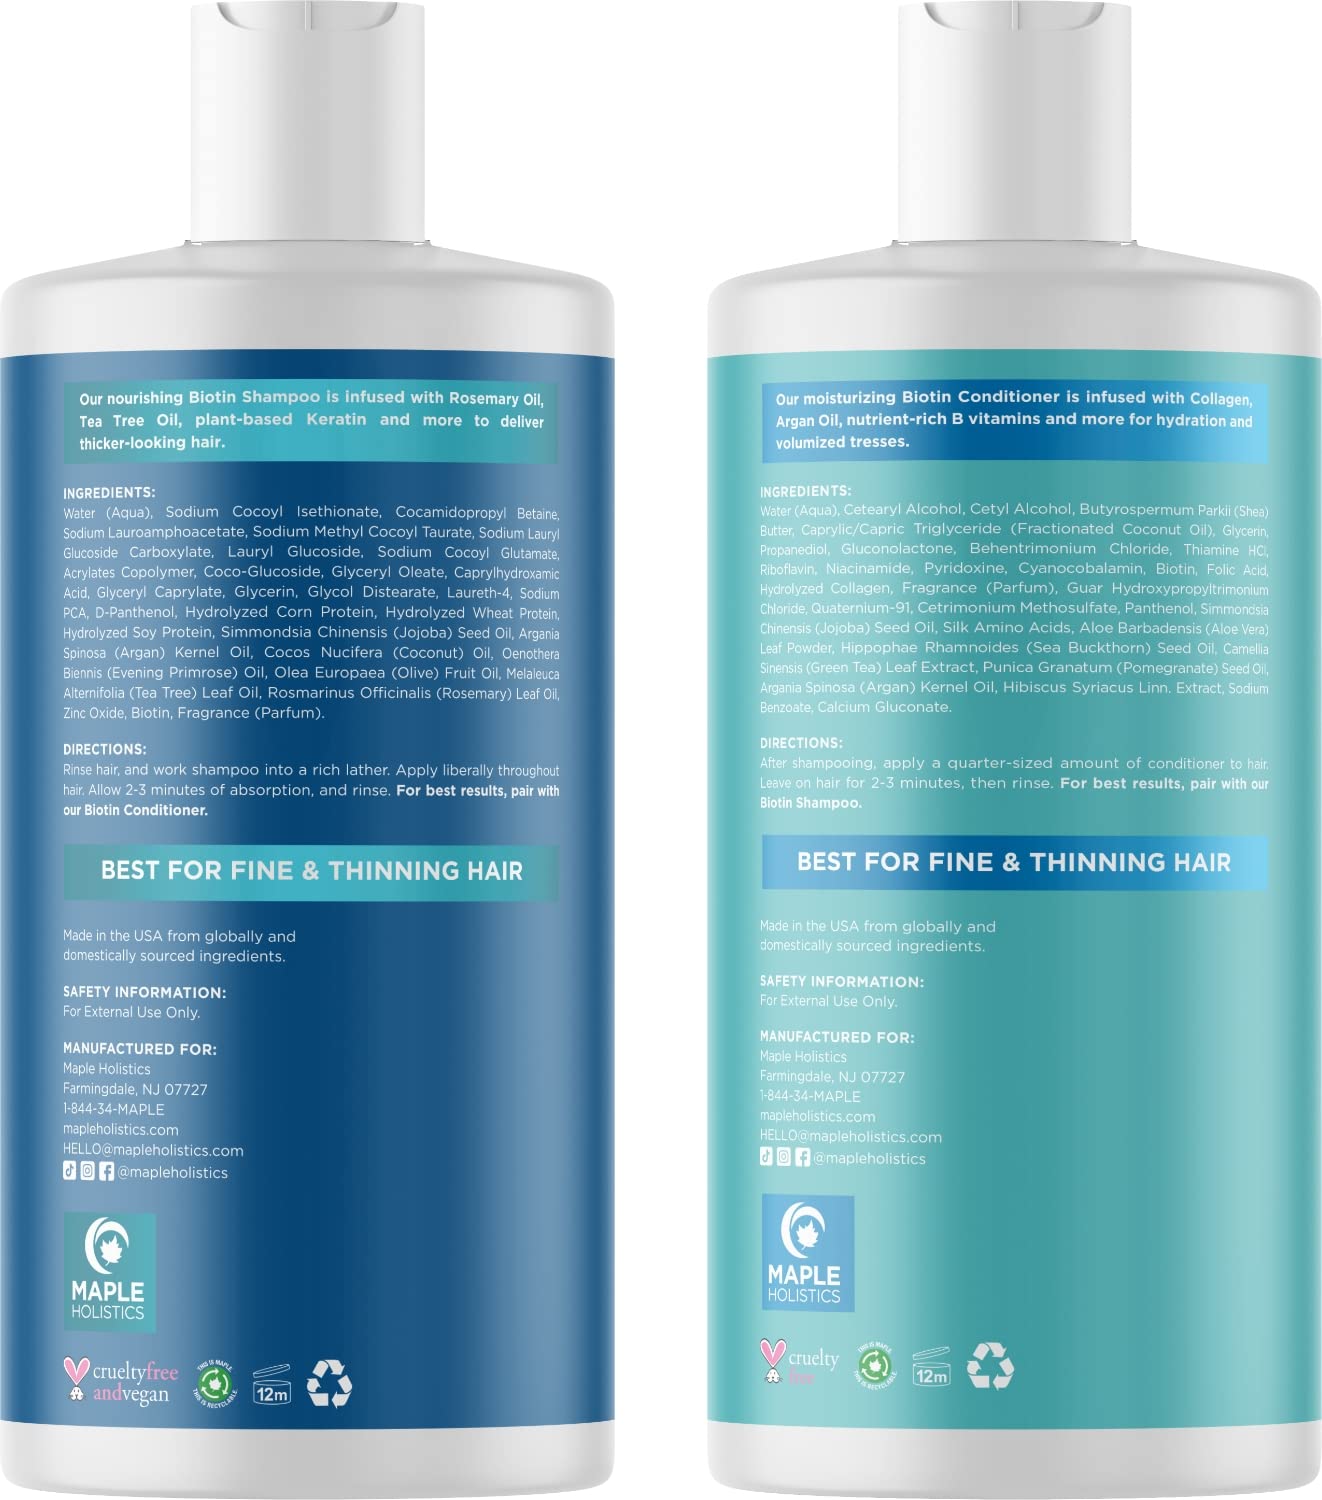 Biotin Shampoo and Conditioner and Hair Supplement - Biotin for Hair Growth Supplement Plus Rosemary and Volumizing Shampoo and Conditioner Set - Rosemary Biotin and Collagen Hair Thickening Products